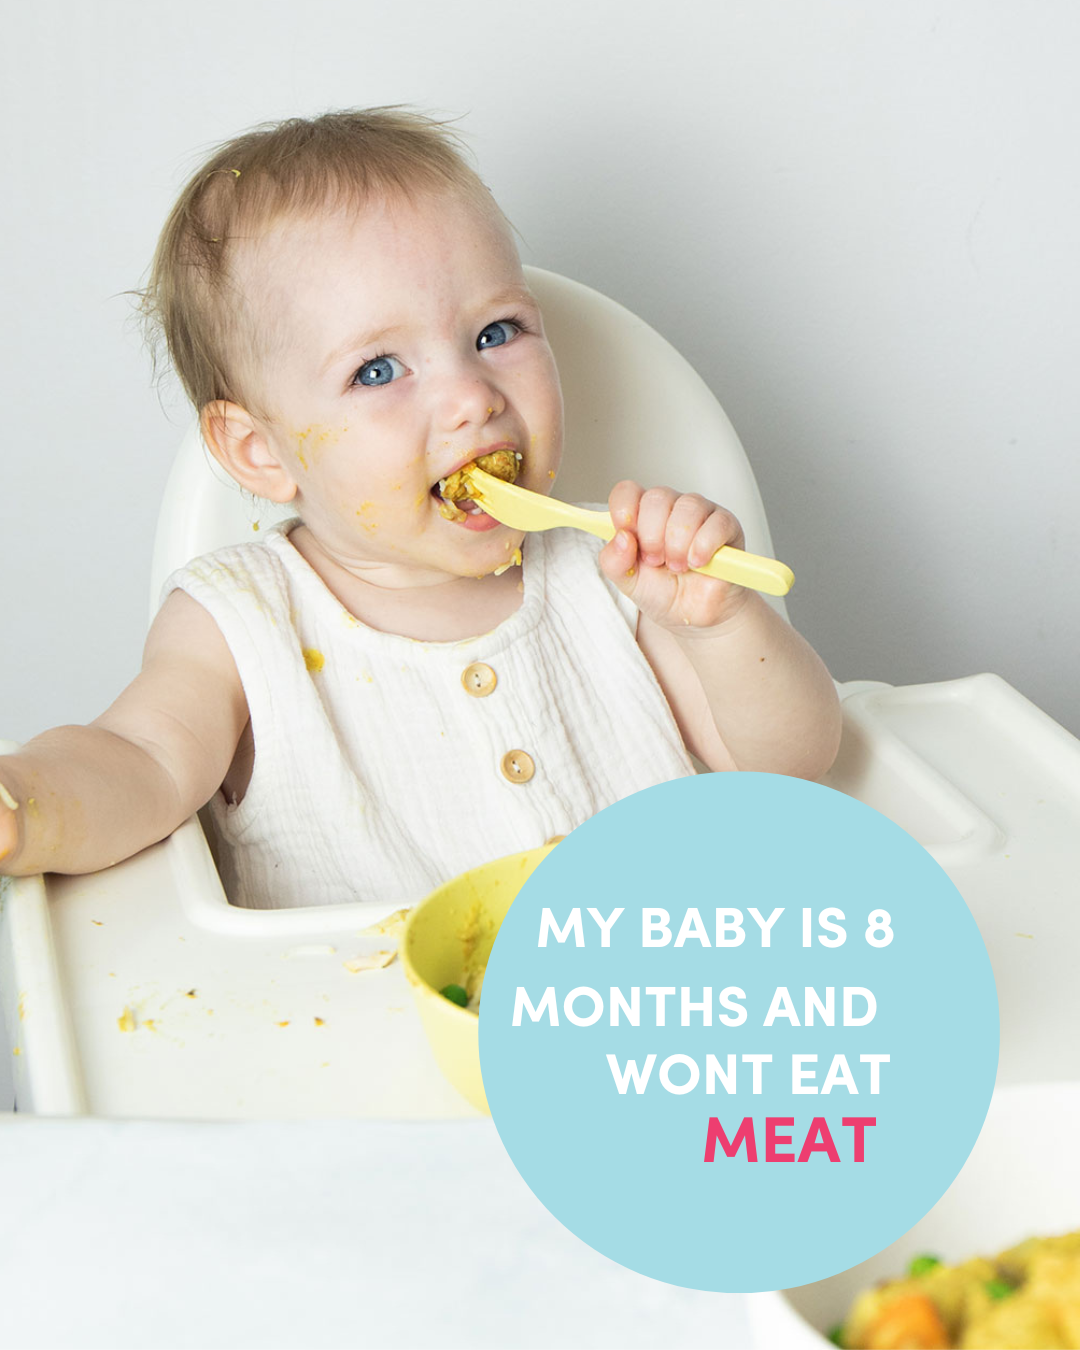 Help my baby is 8 months and won't eat meat?